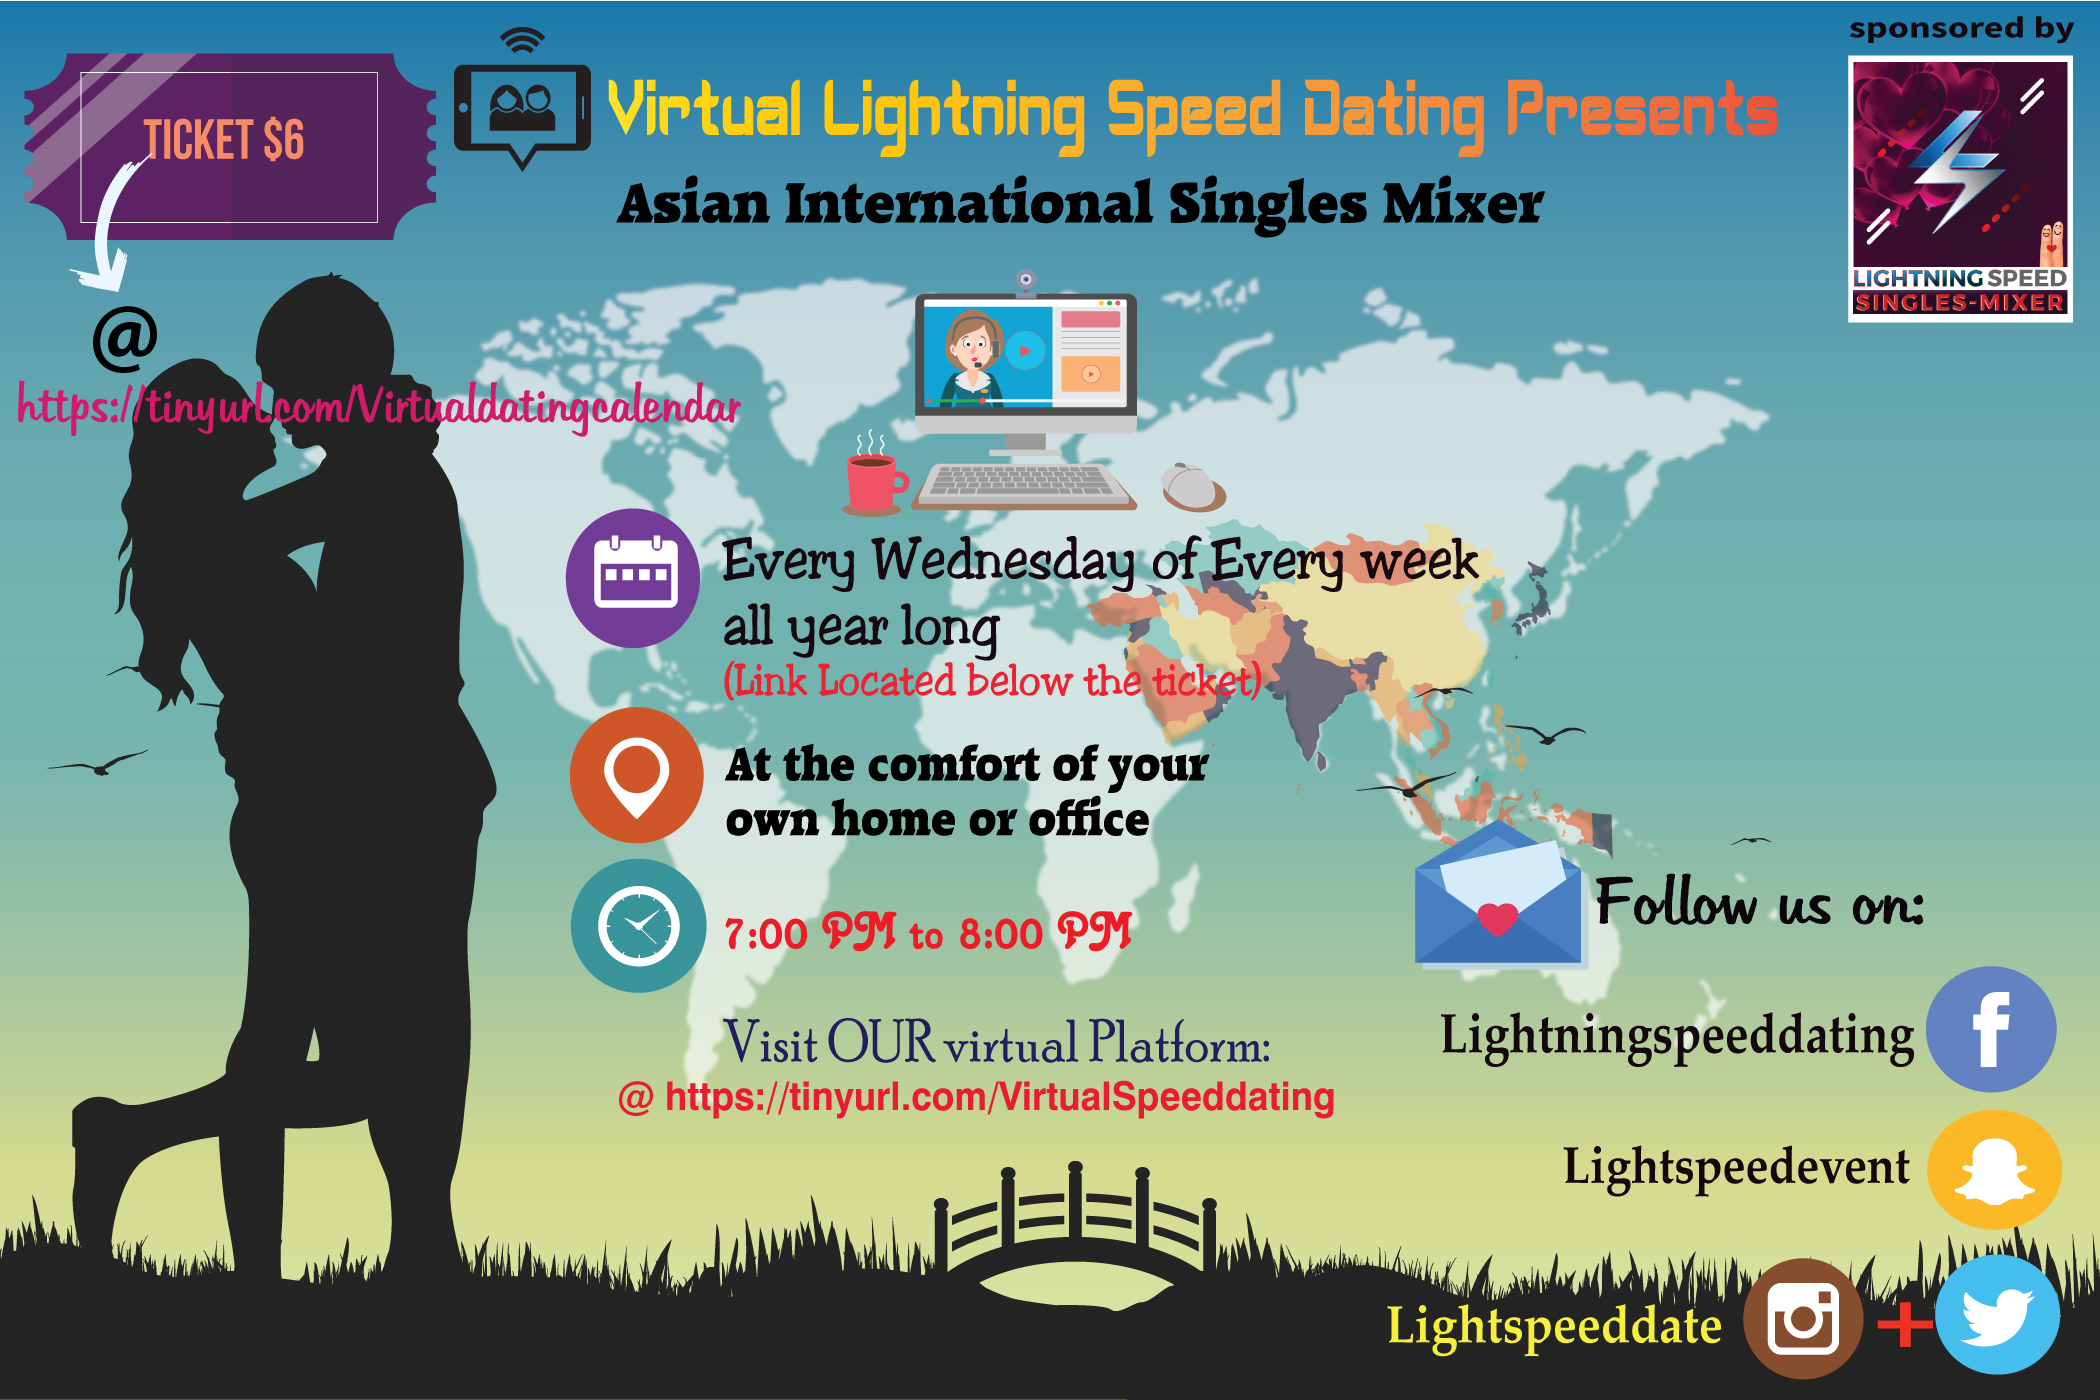 Dating-sites in europa